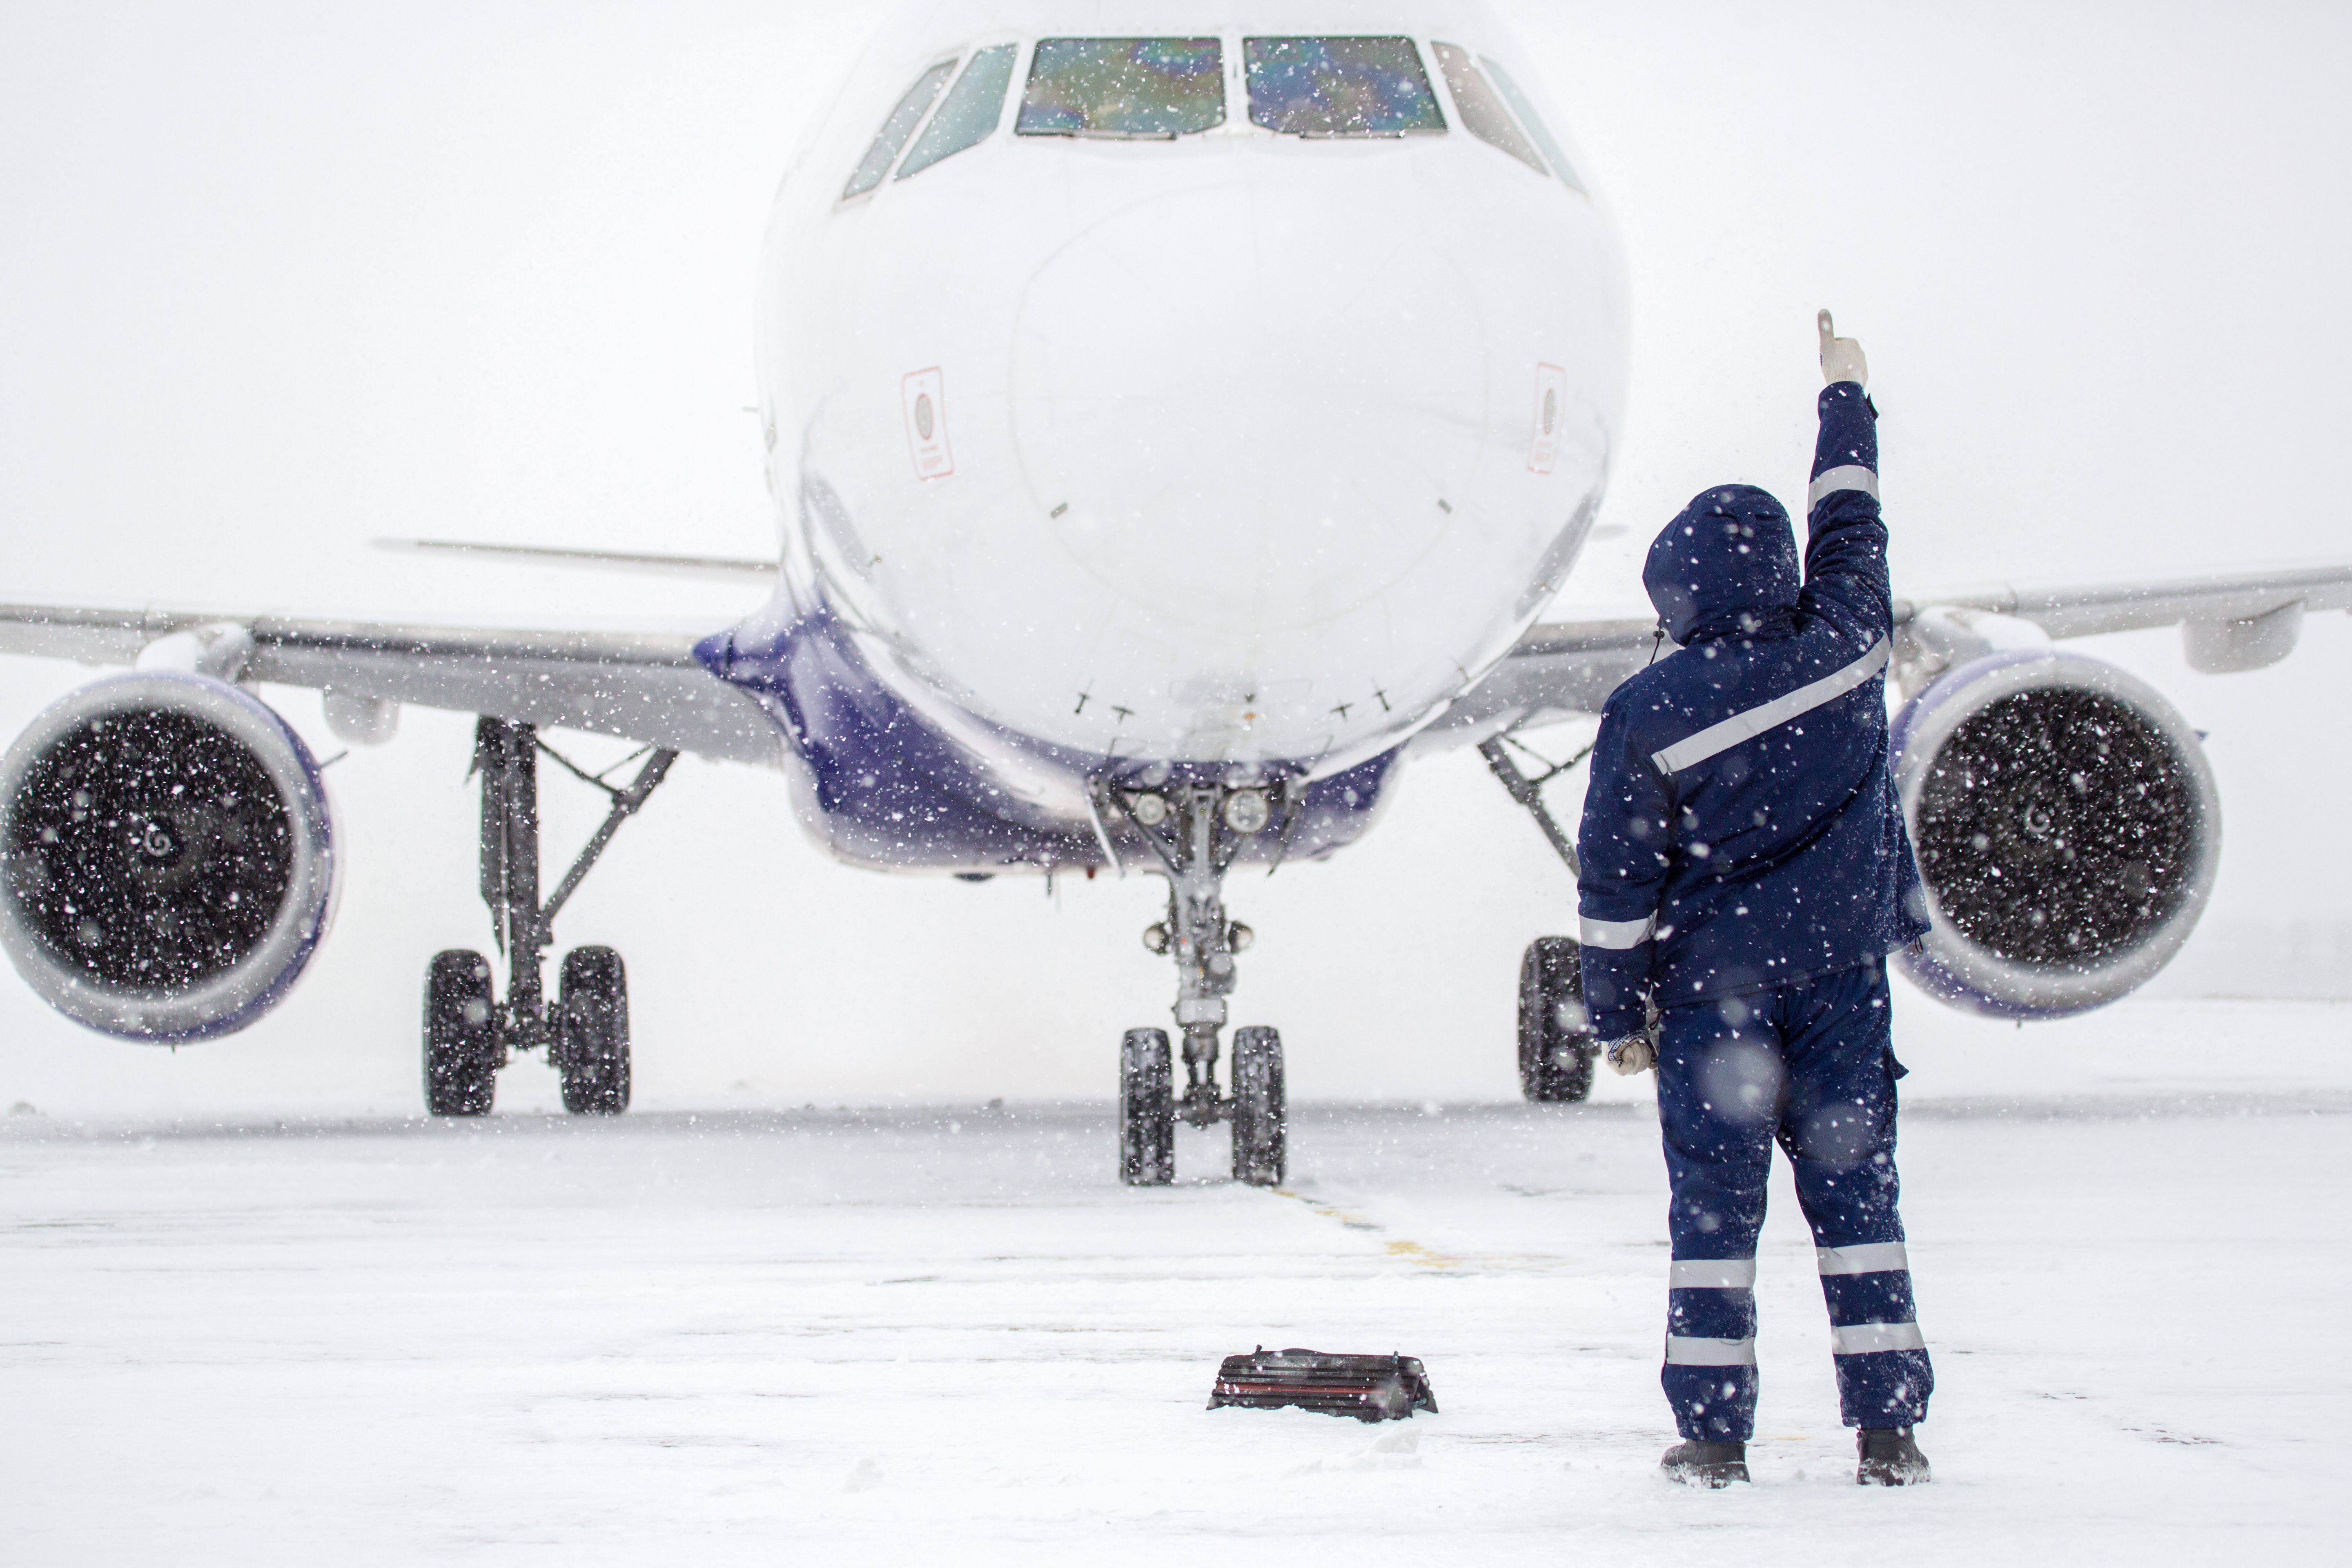 Airplane Silhouette in Snow with Ramp Agent